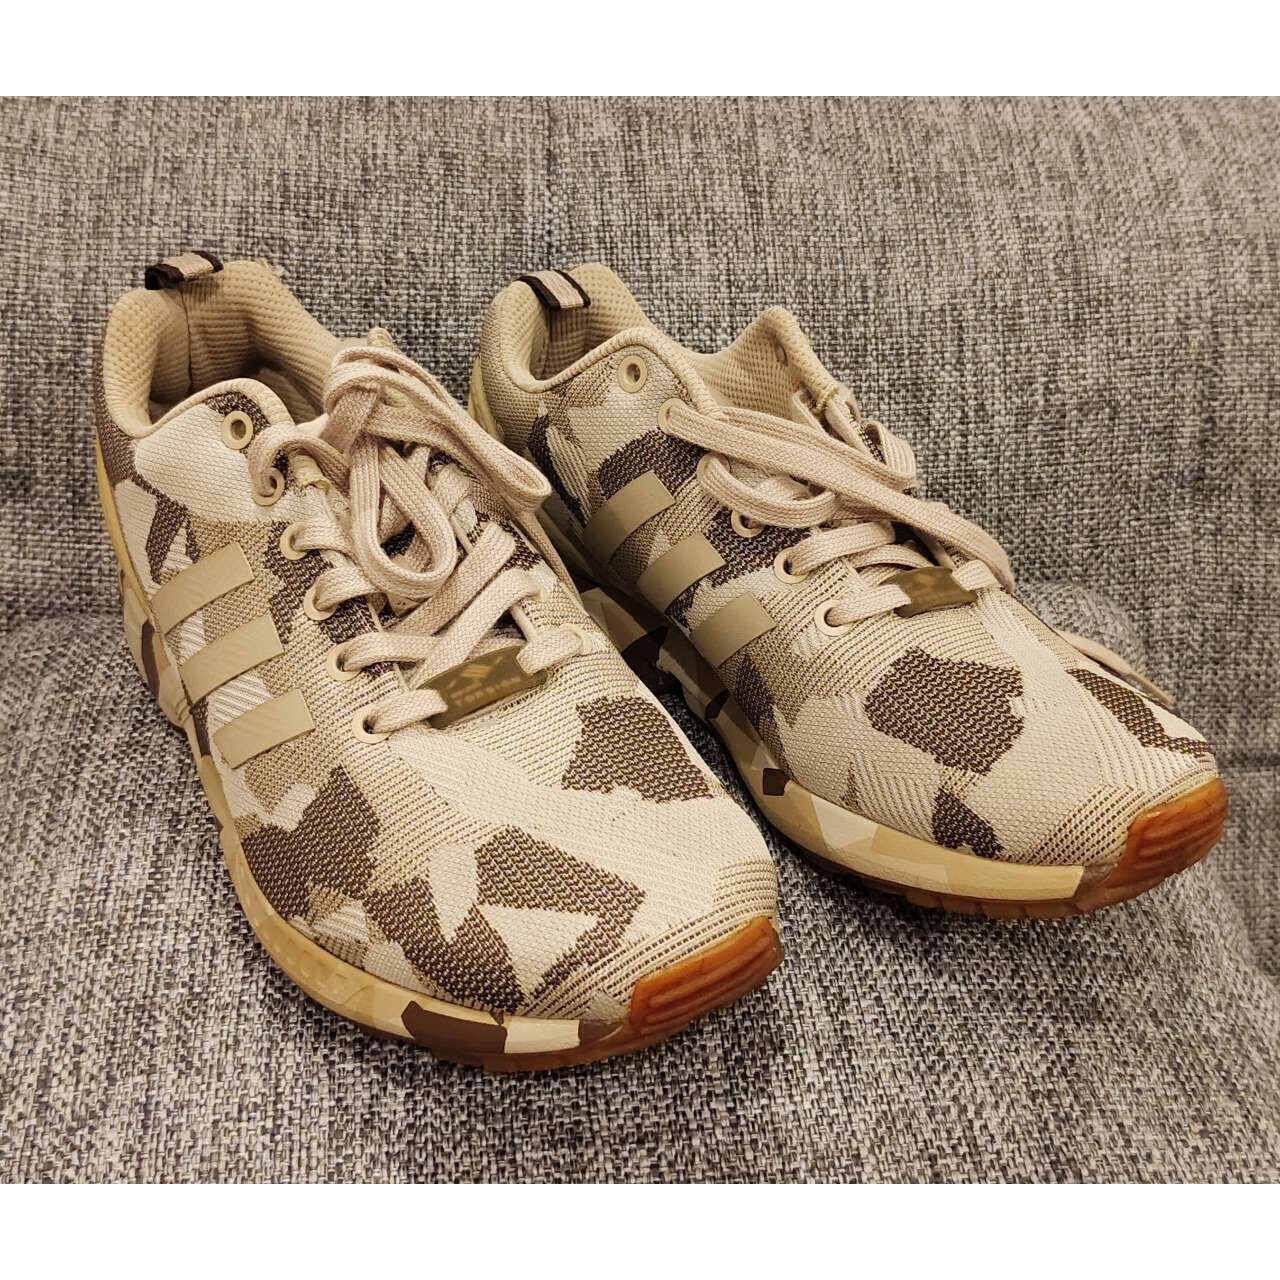 Adidas ZX Flux Clear Brown Sneakers